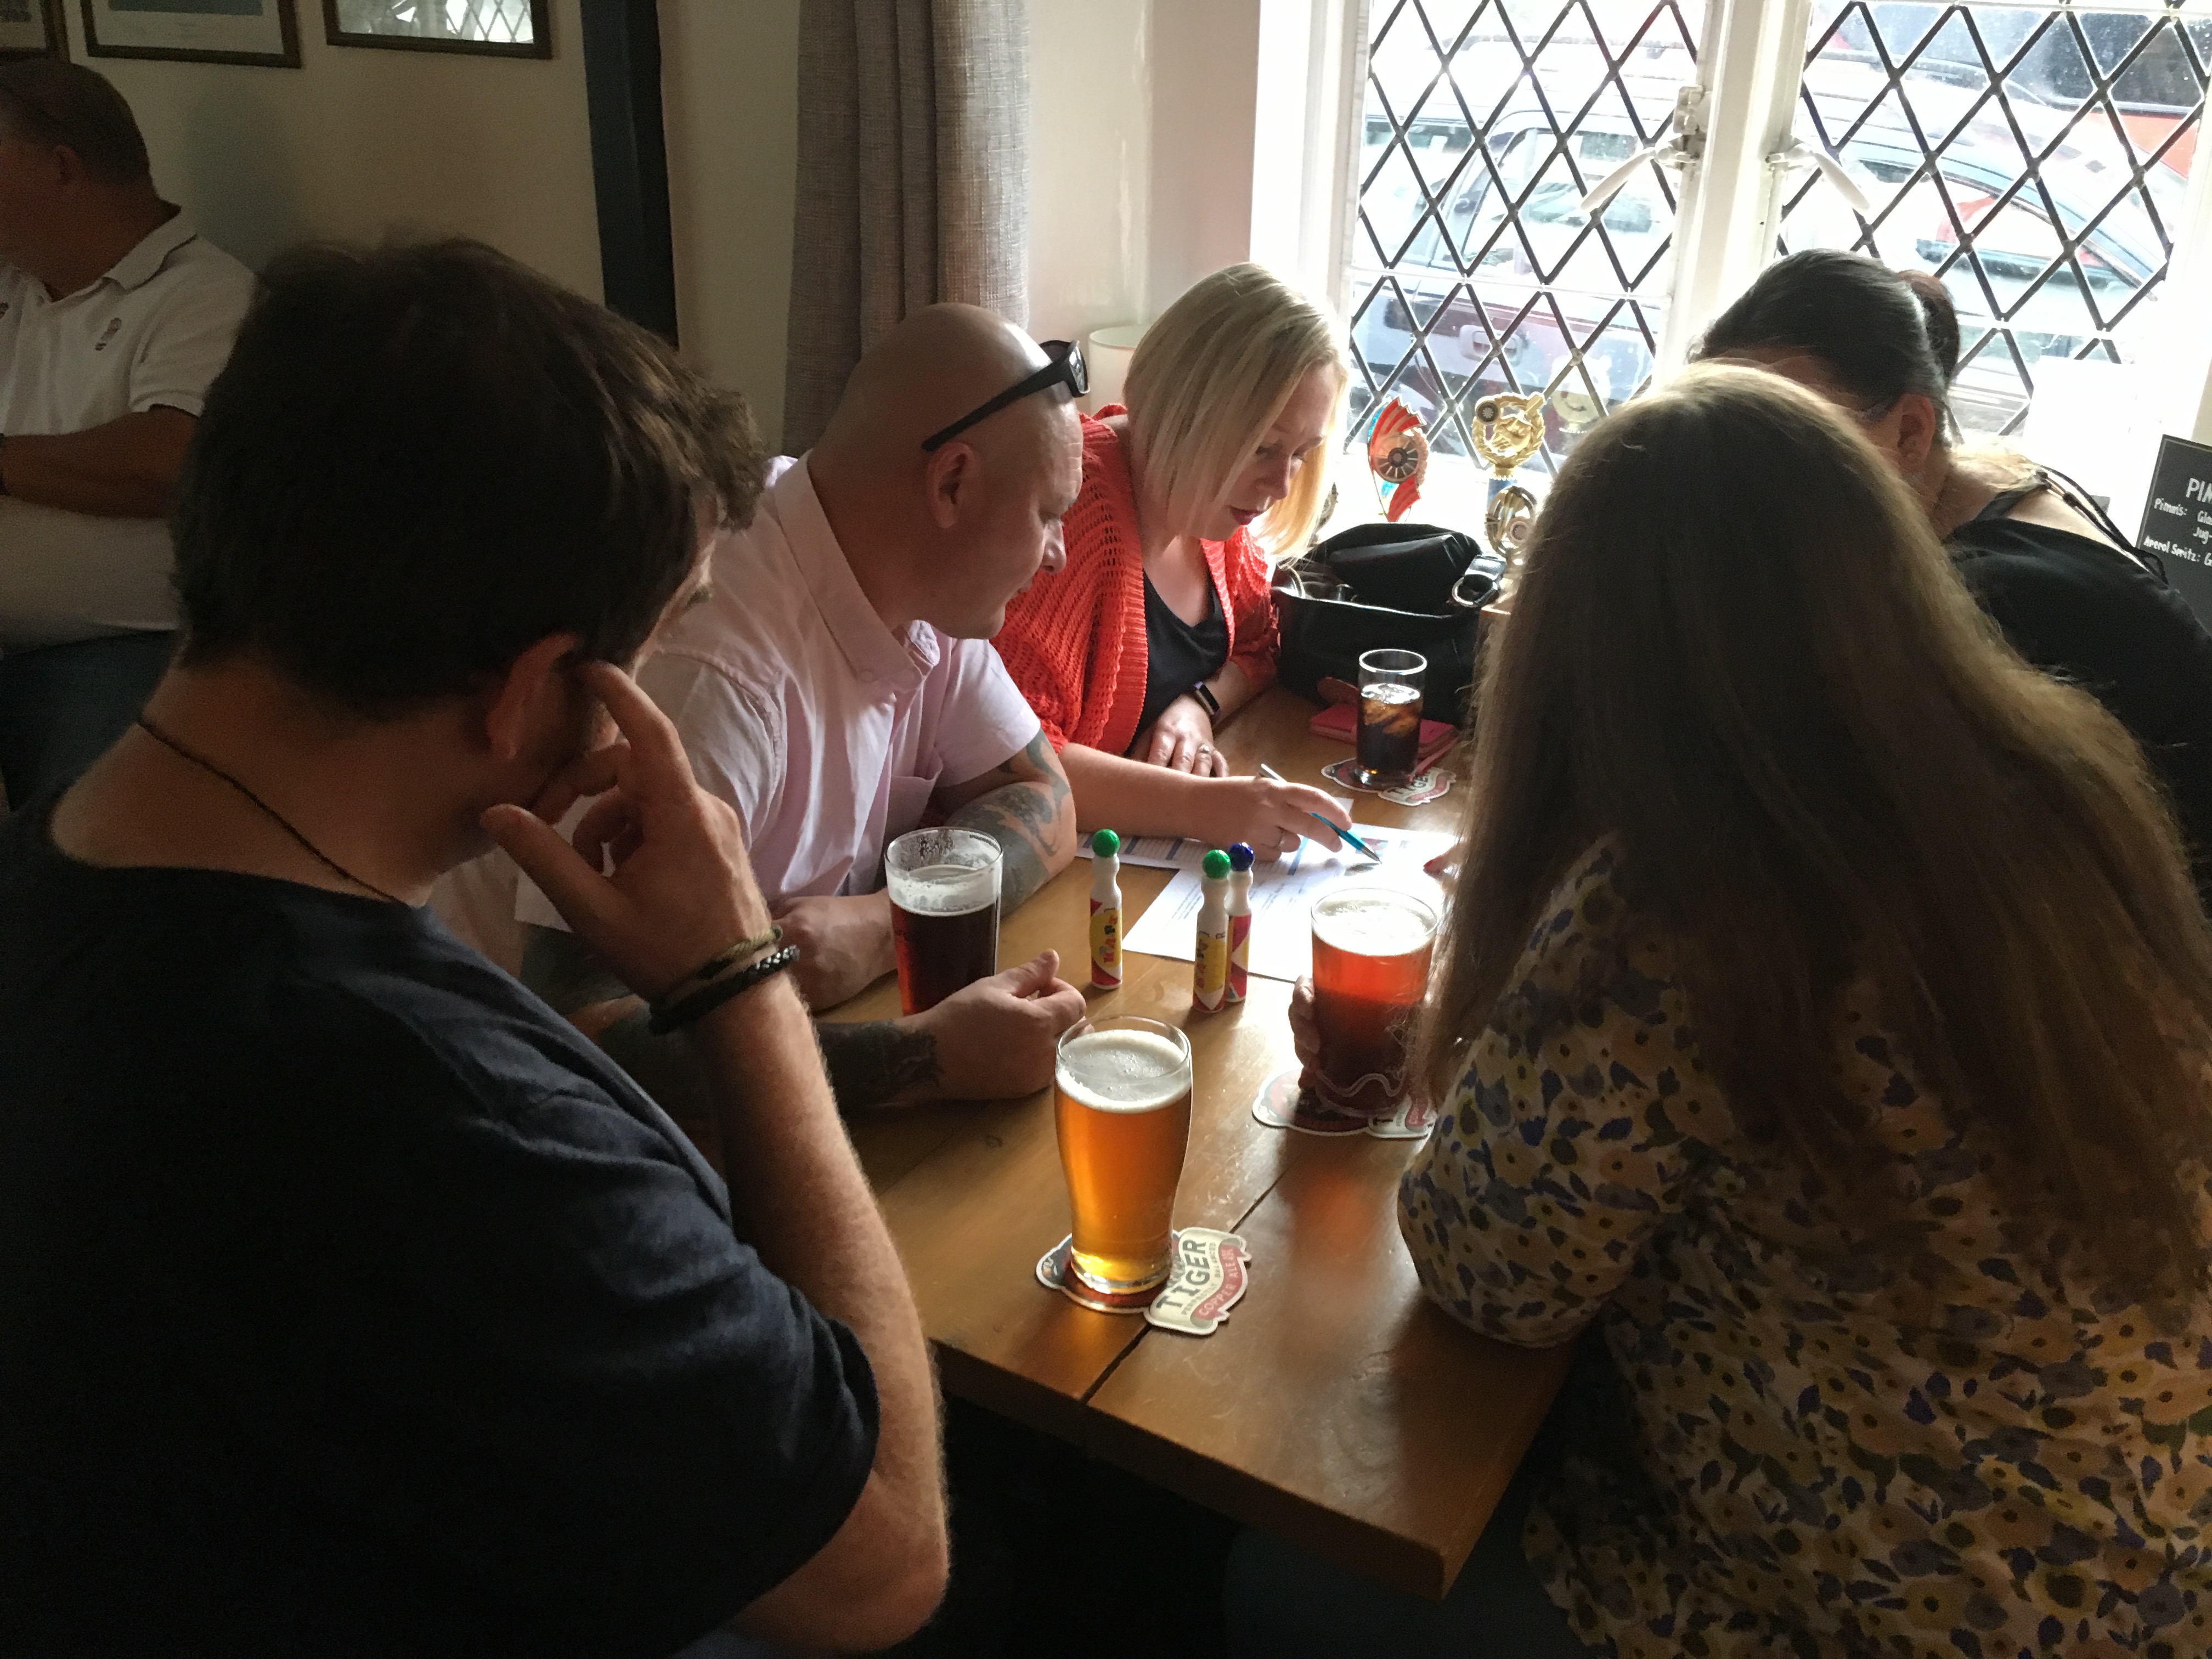 Soapbox derby quiz night at the Plough - July 28th